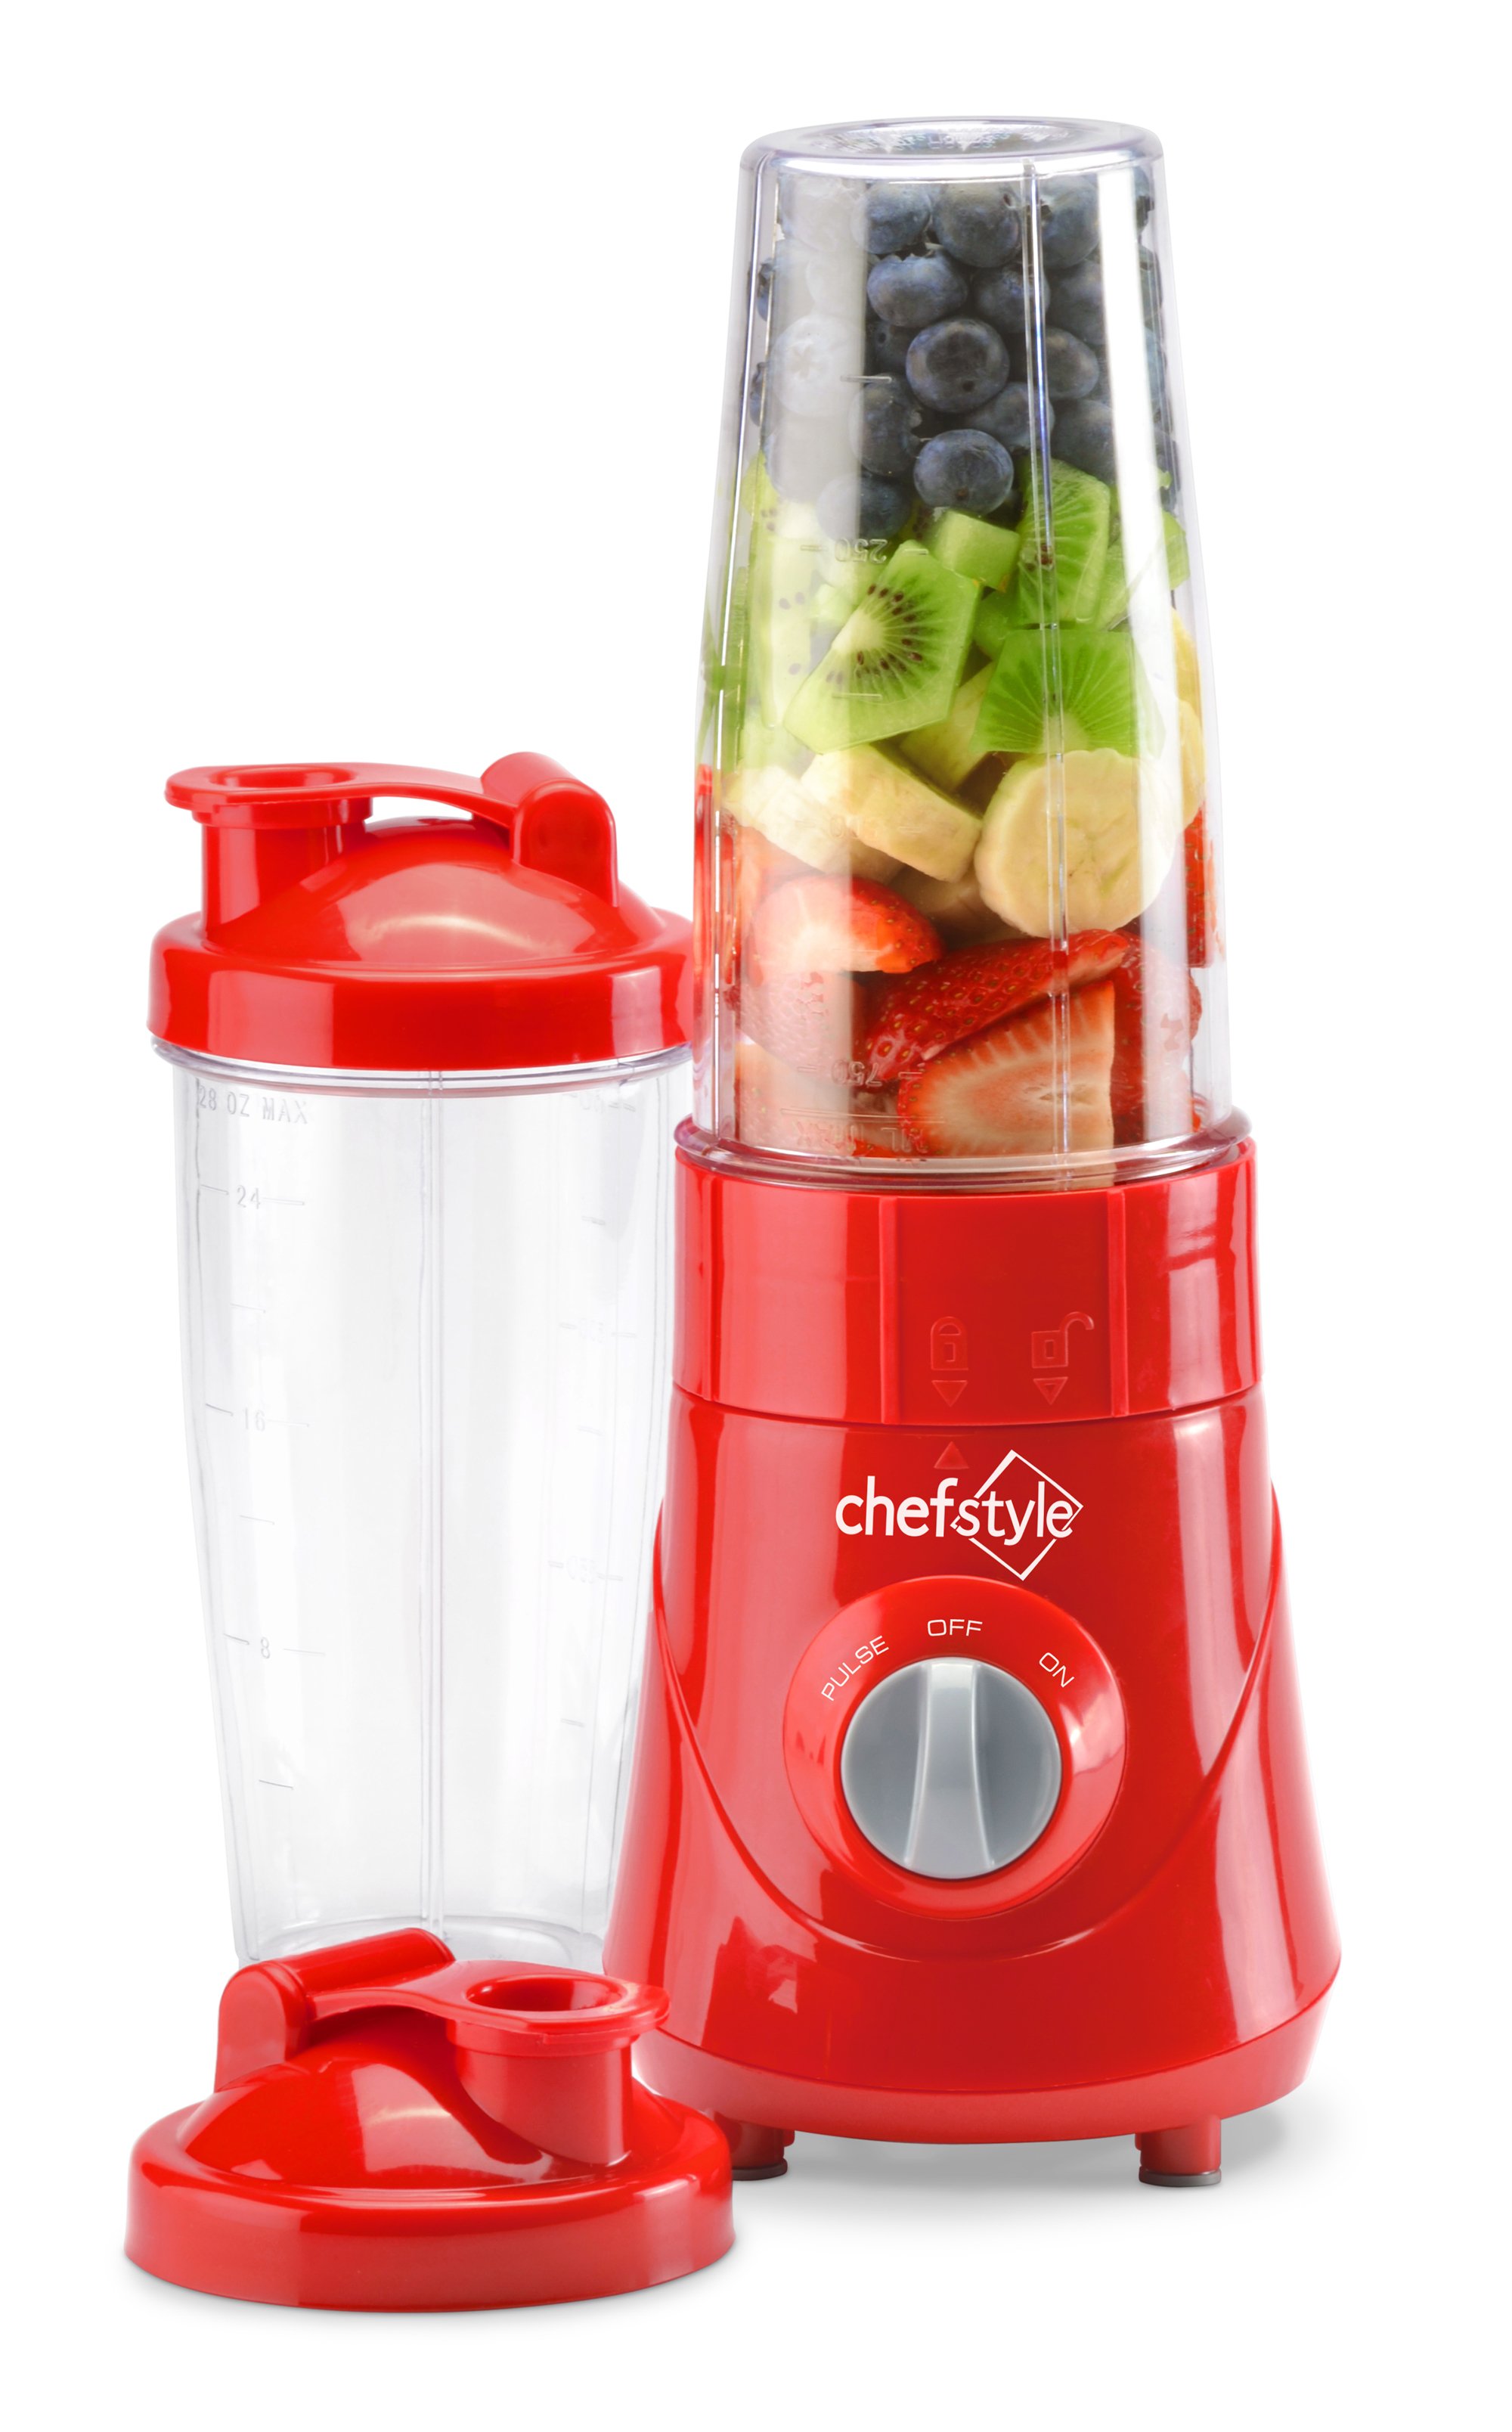 chefstyle On The Go Personal Blender, Red - Shop Blenders & Mixers